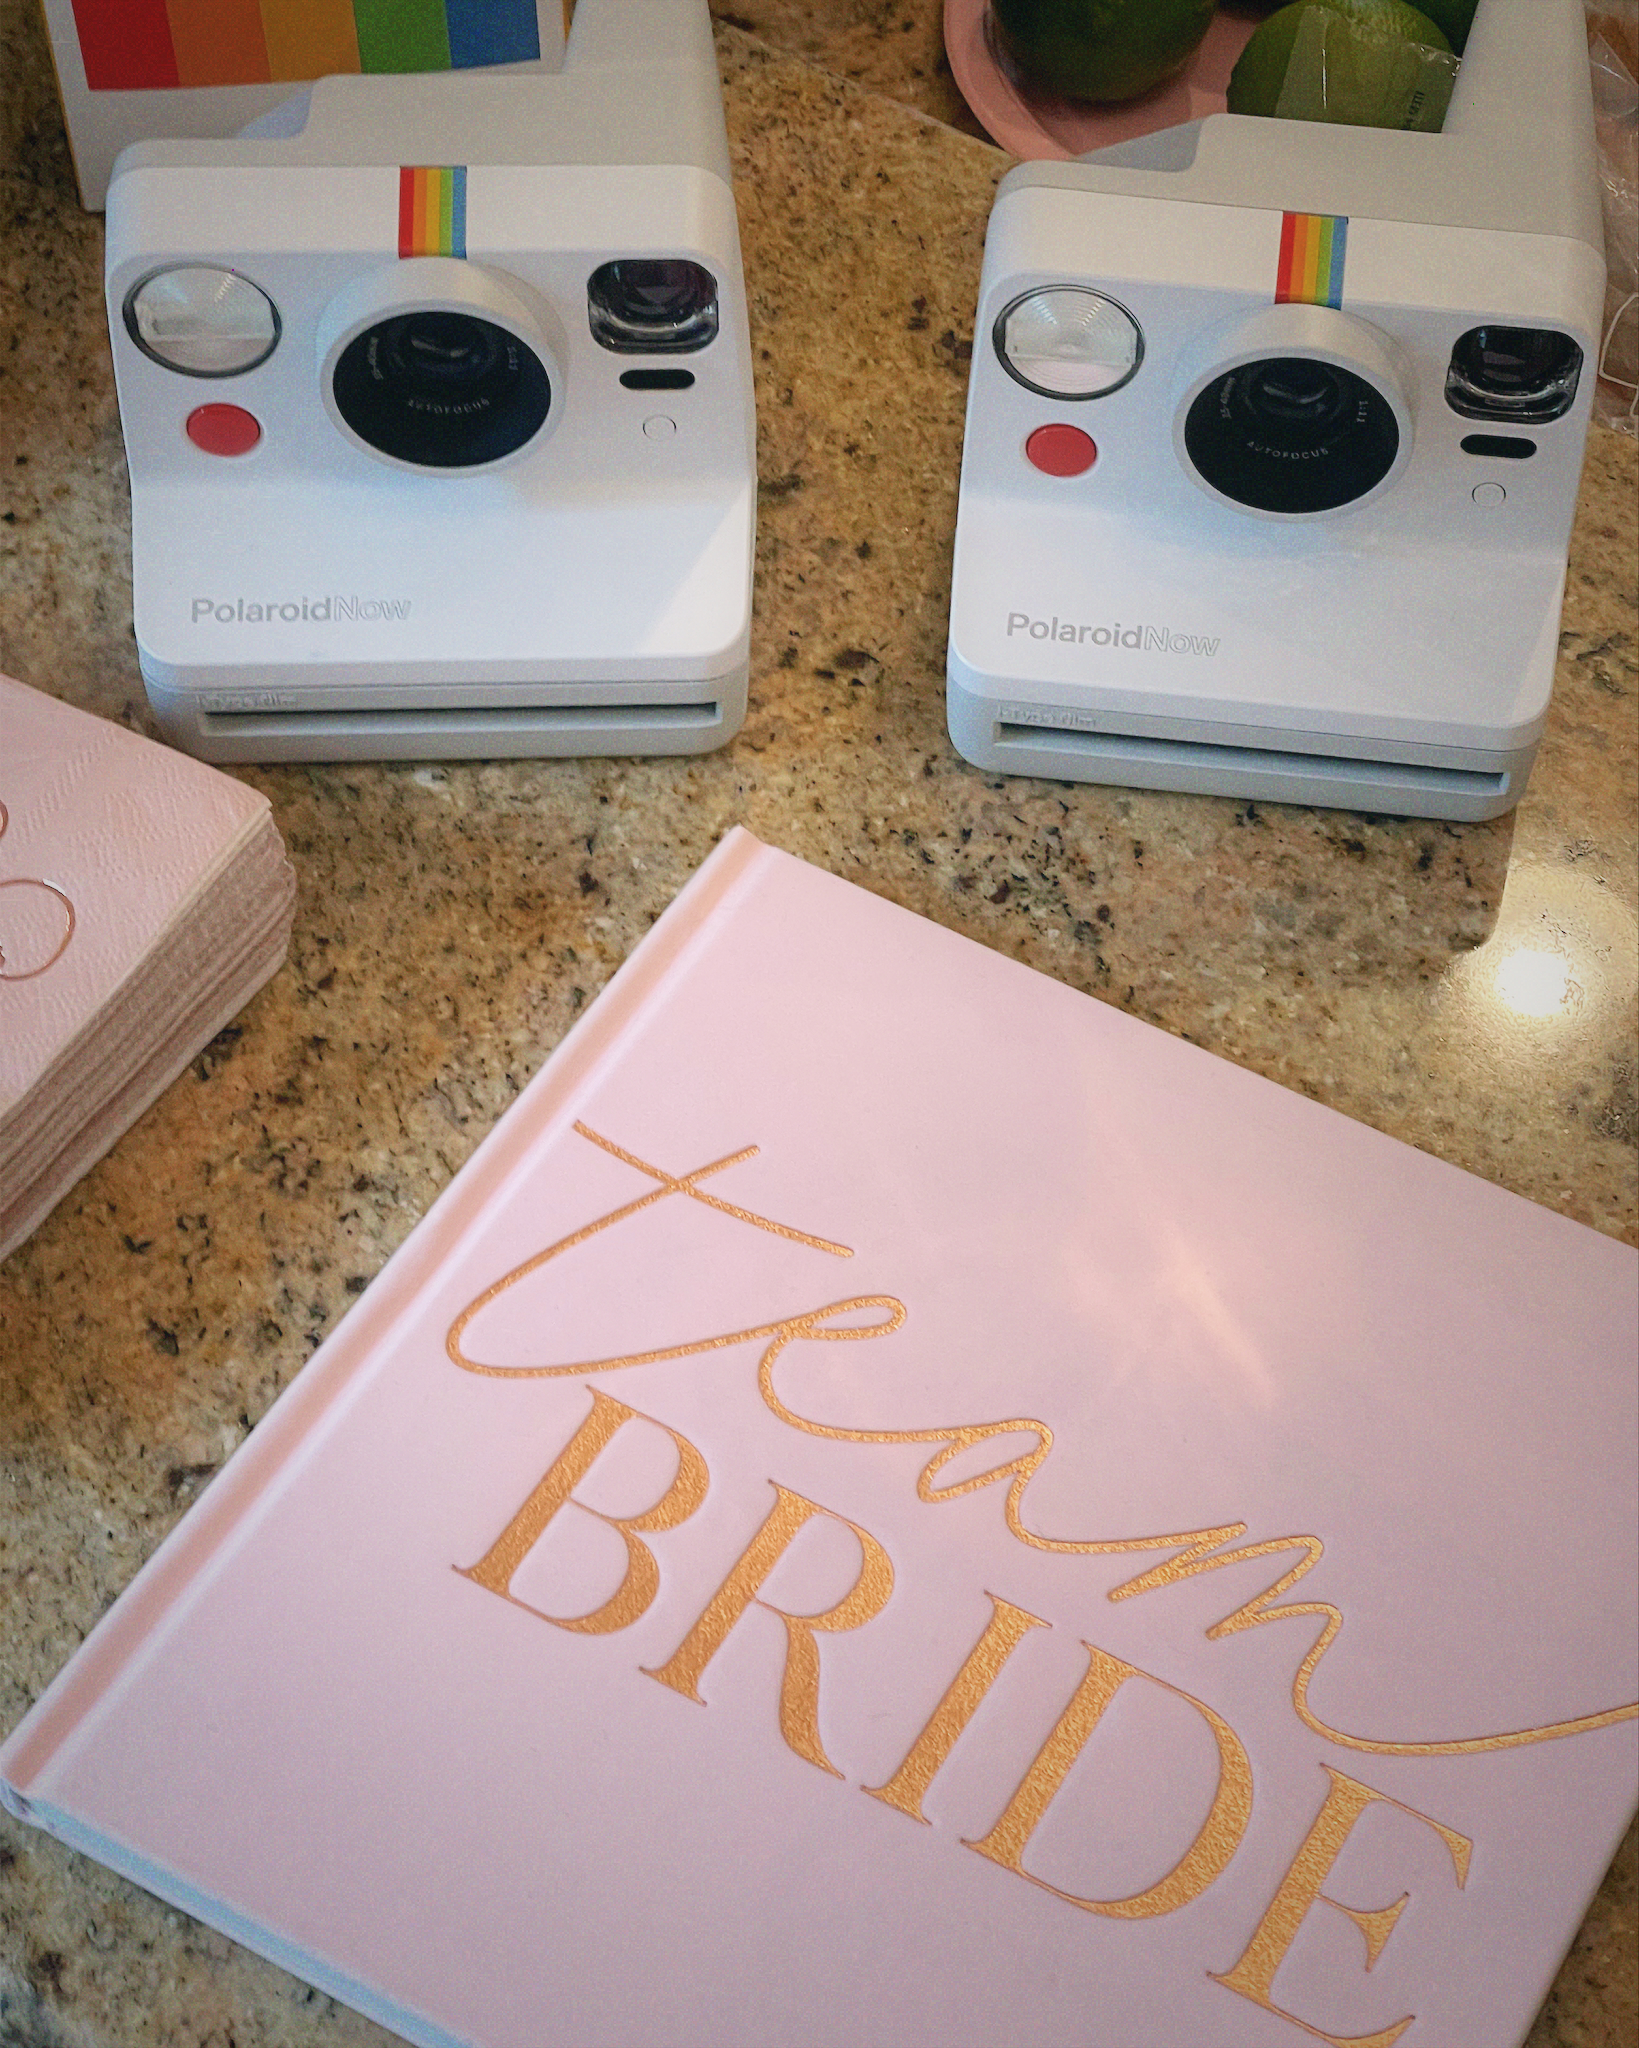 Everything You Need To Host a Coastal Bachelorette Weekend | Cape Cod Bachelorette | Wholesome Bachelorette Ideas | Cape Cad Massachusetts Bachelorette Itinerary | What To Do In Cape Cod for A Bachelorette Party | New England Bachelorette | Coastal Bachelorette Party Theme | Bachelorette Themes | How To Host A Coastal Bachelorette | Polaroid Camera and Team bride Book | Simply by Simone